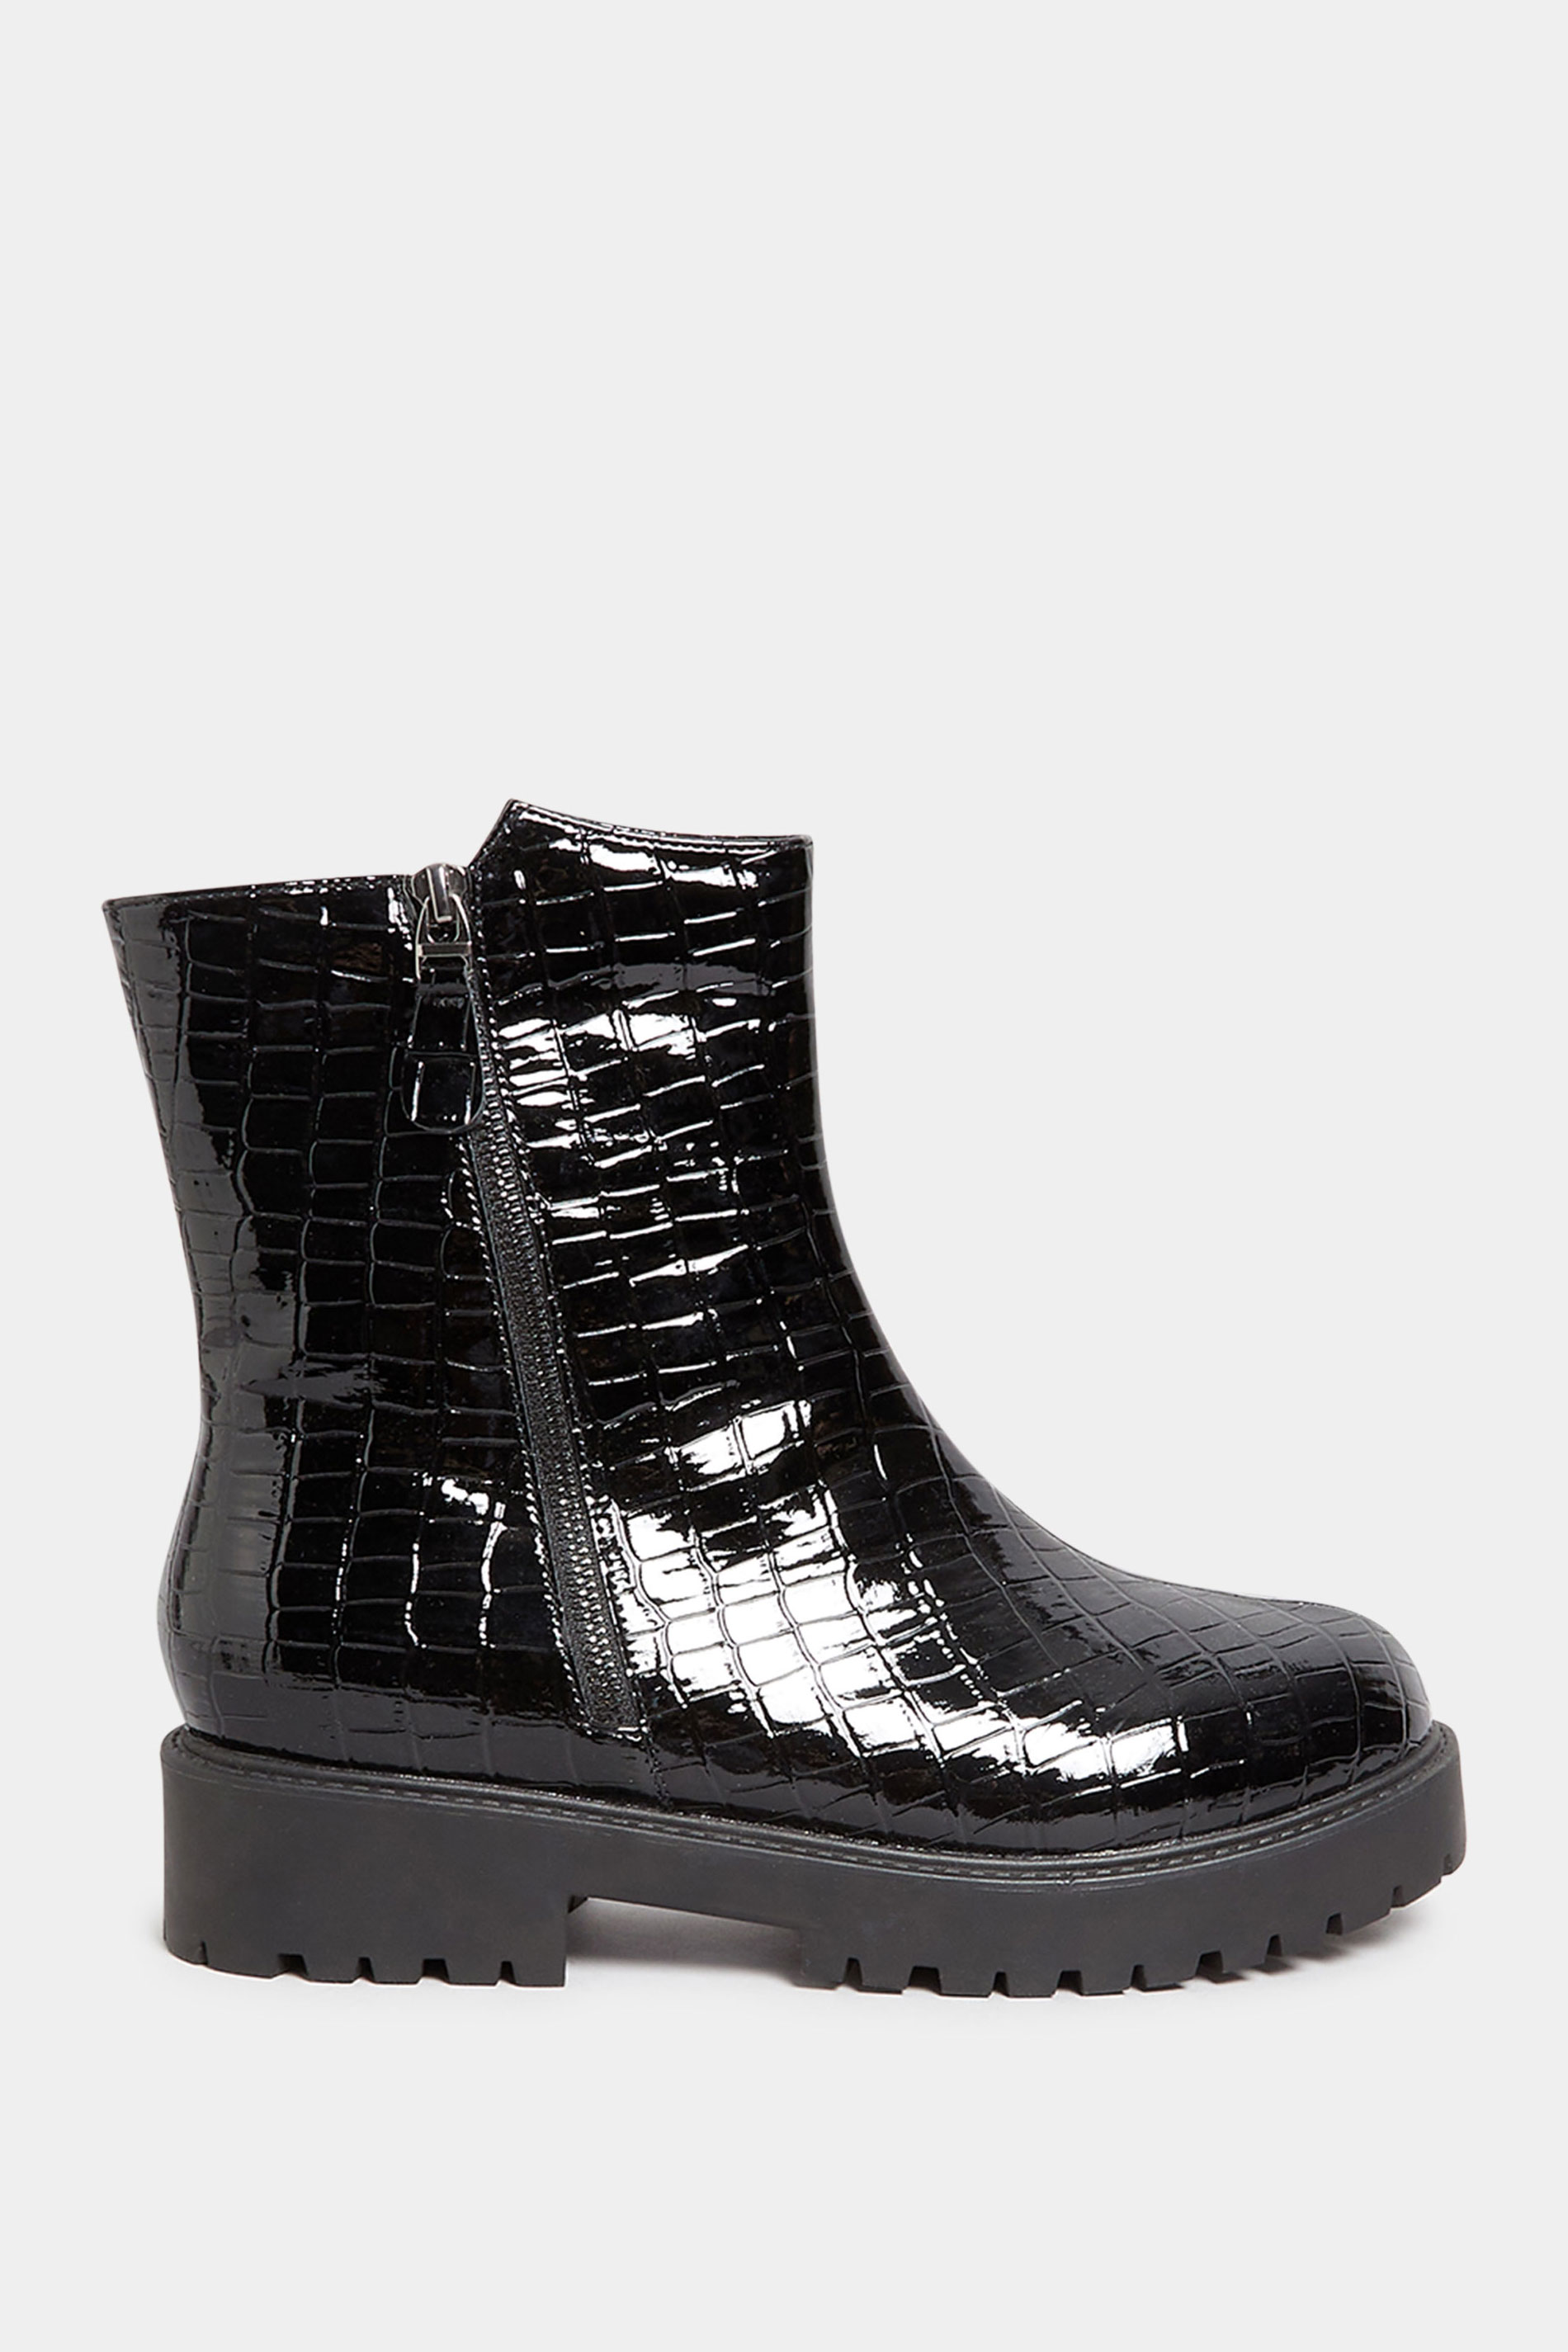 Black Croc Patent Side Zip Boots In Extra Wide EEE Fit | Yours Clothing 3